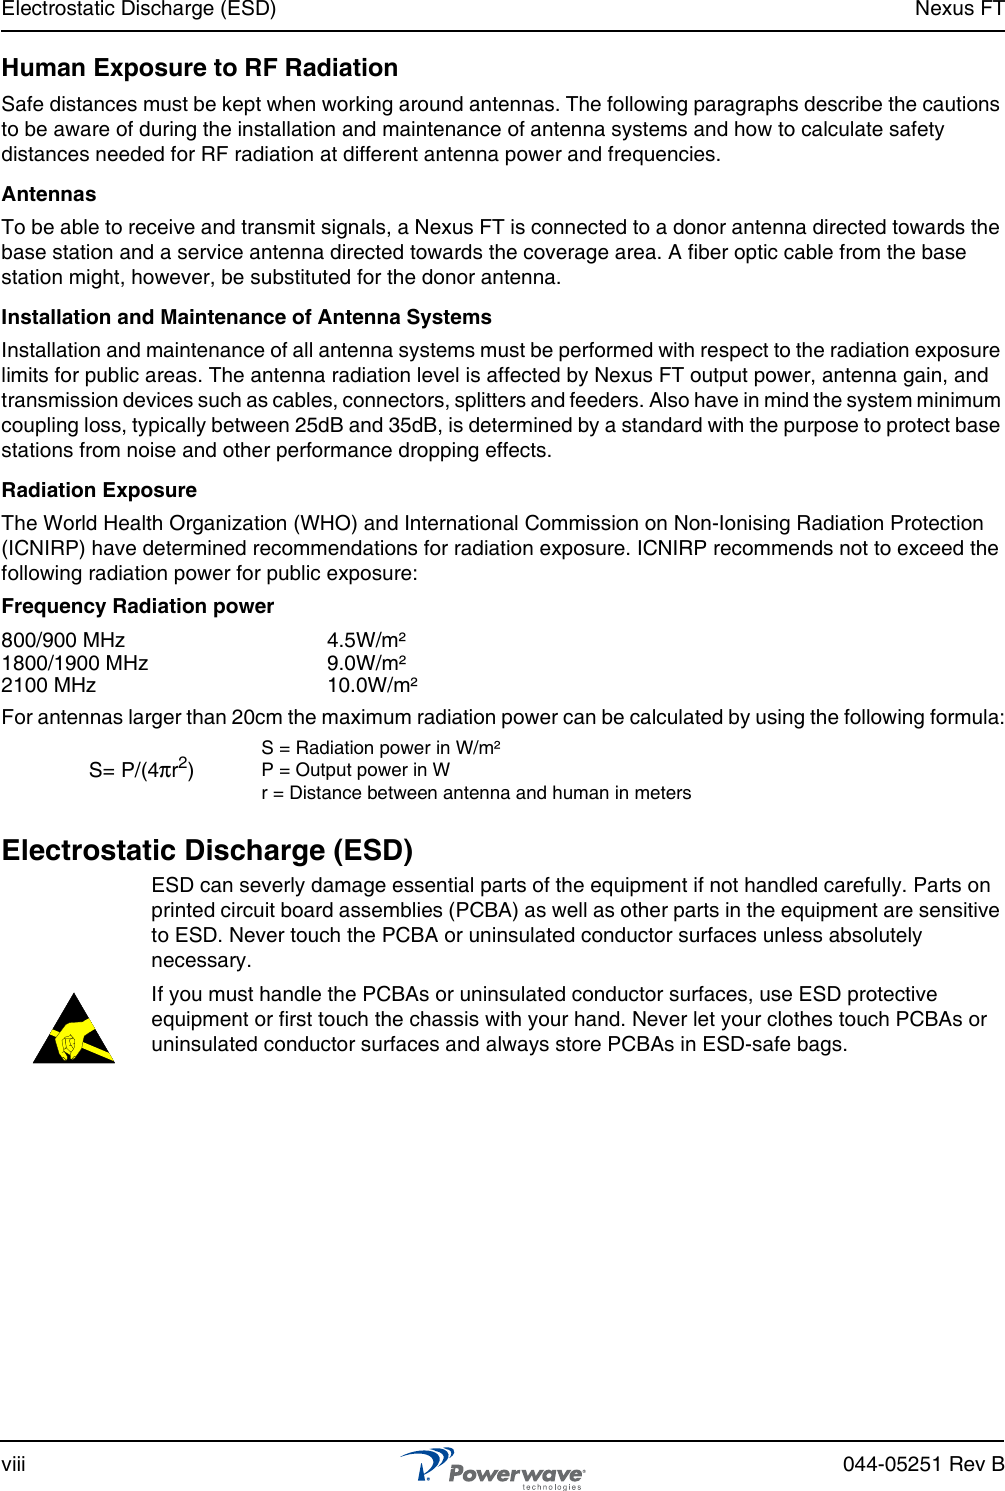 Electrostatic Discharge (ESD) Nexus FTviii 044-05251 Rev BHuman Exposure to RF RadiationSafe distances must be kept when working around antennas. The following paragraphs describe the cautions to be aware of during the installation and maintenance of antenna systems and how to calculate safety distances needed for RF radiation at different antenna power and frequencies.AntennasTo be able to receive and transmit signals, a Nexus FT is connected to a donor antenna directed towards the base station and a service antenna directed towards the coverage area. A fiber optic cable from the base station might, however, be substituted for the donor antenna.Installation and Maintenance of Antenna SystemsInstallation and maintenance of all antenna systems must be performed with respect to the radiation exposure limits for public areas. The antenna radiation level is affected by Nexus FT output power, antenna gain, and transmission devices such as cables, connectors, splitters and feeders. Also have in mind the system minimum coupling loss, typically between 25dB and 35dB, is determined by a standard with the purpose to protect base stations from noise and other performance dropping effects.Radiation ExposureThe World Health Organization (WHO) and International Commission on Non-Ionising Radiation Protection (ICNIRP) have determined recommendations for radiation exposure. ICNIRP recommends not to exceed the following radiation power for public exposure:Frequency Radiation power800/900 MHz 4.5W/m²1800/1900 MHz 9.0W/m²2100 MHz 10.0W/m²For antennas larger than 20cm the maximum radiation power can be calculated by using the following formula:Electrostatic Discharge (ESD) ESD can severly damage essential parts of the equipment if not handled carefully. Parts on printed circuit board assemblies (PCBA) as well as other parts in the equipment are sensitive to ESD. Never touch the PCBA or uninsulated conductor surfaces unless absolutely necessary.If you must handle the PCBAs or uninsulated conductor surfaces, use ESD protective equipment or first touch the chassis with your hand. Never let your clothes touch PCBAs or uninsulated conductor surfaces and always store PCBAs in ESD-safe bags.S= P/(4πr2)S = Radiation power in W/m²P = Output power in Wr = Distance between antenna and human in meters